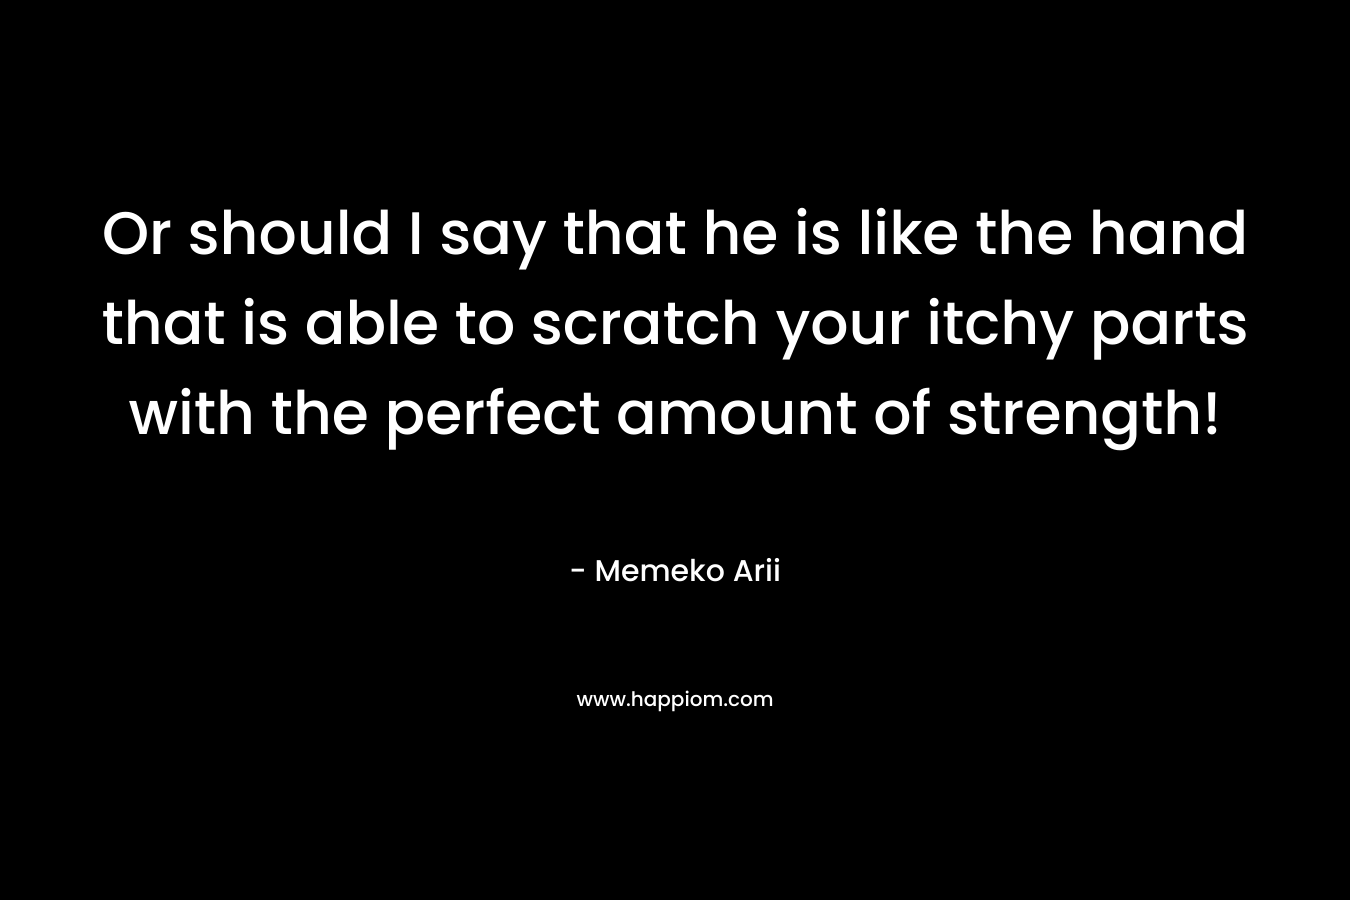 Or should I say that he is like the hand that is able to scratch your itchy parts with the perfect amount of strength! – Memeko Arii